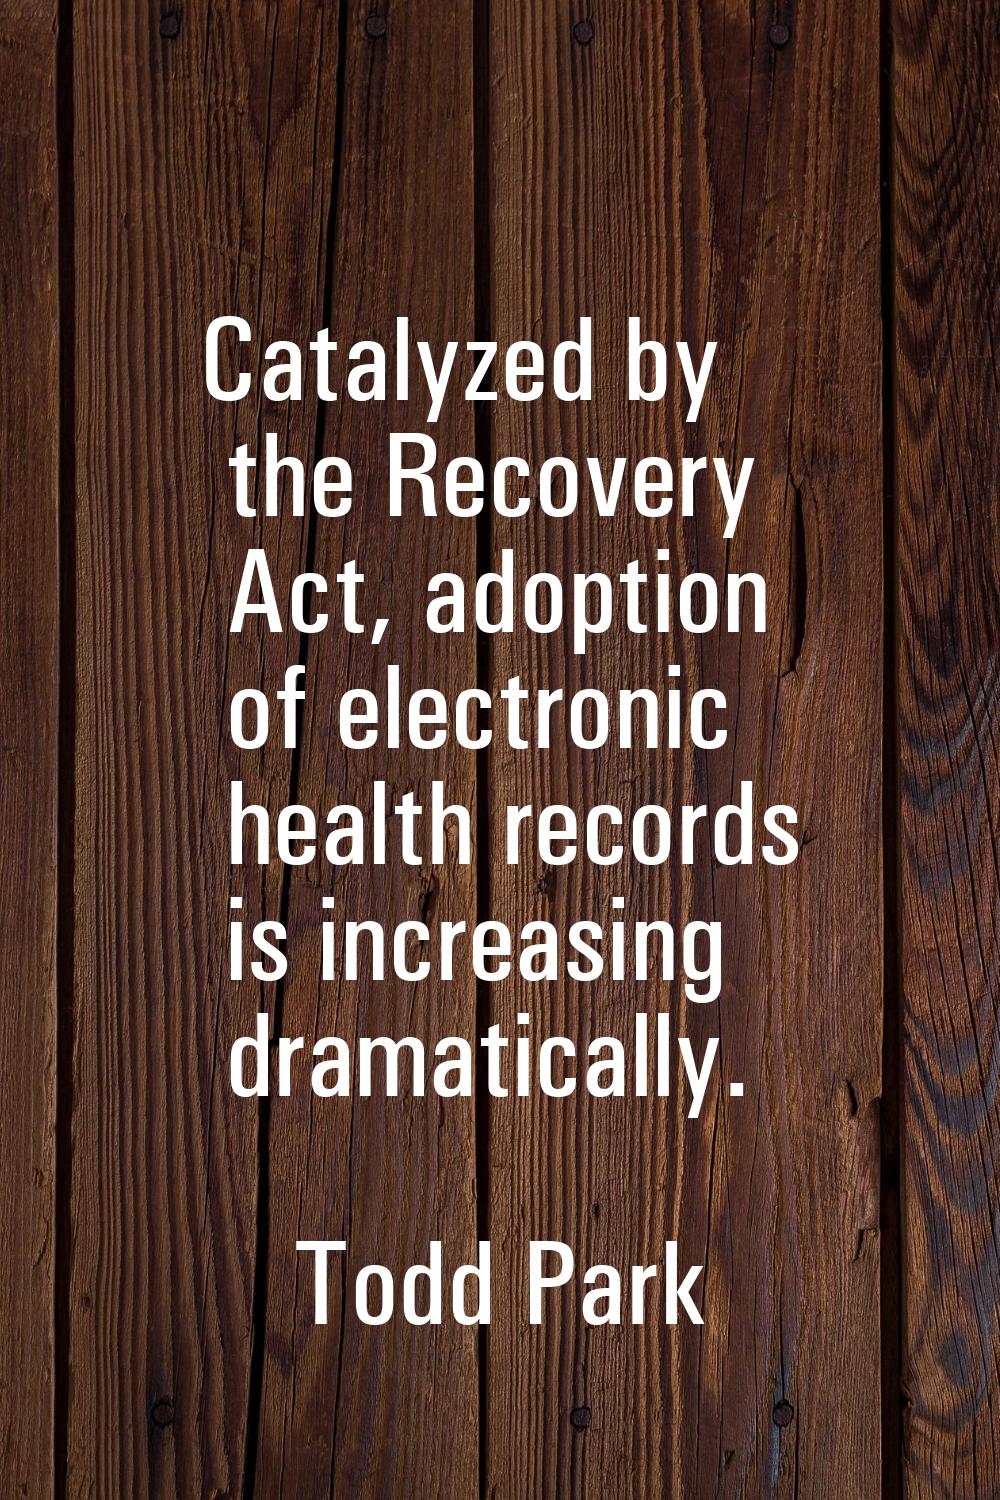 Catalyzed by the Recovery Act, adoption of electronic health records is increasing dramatically.